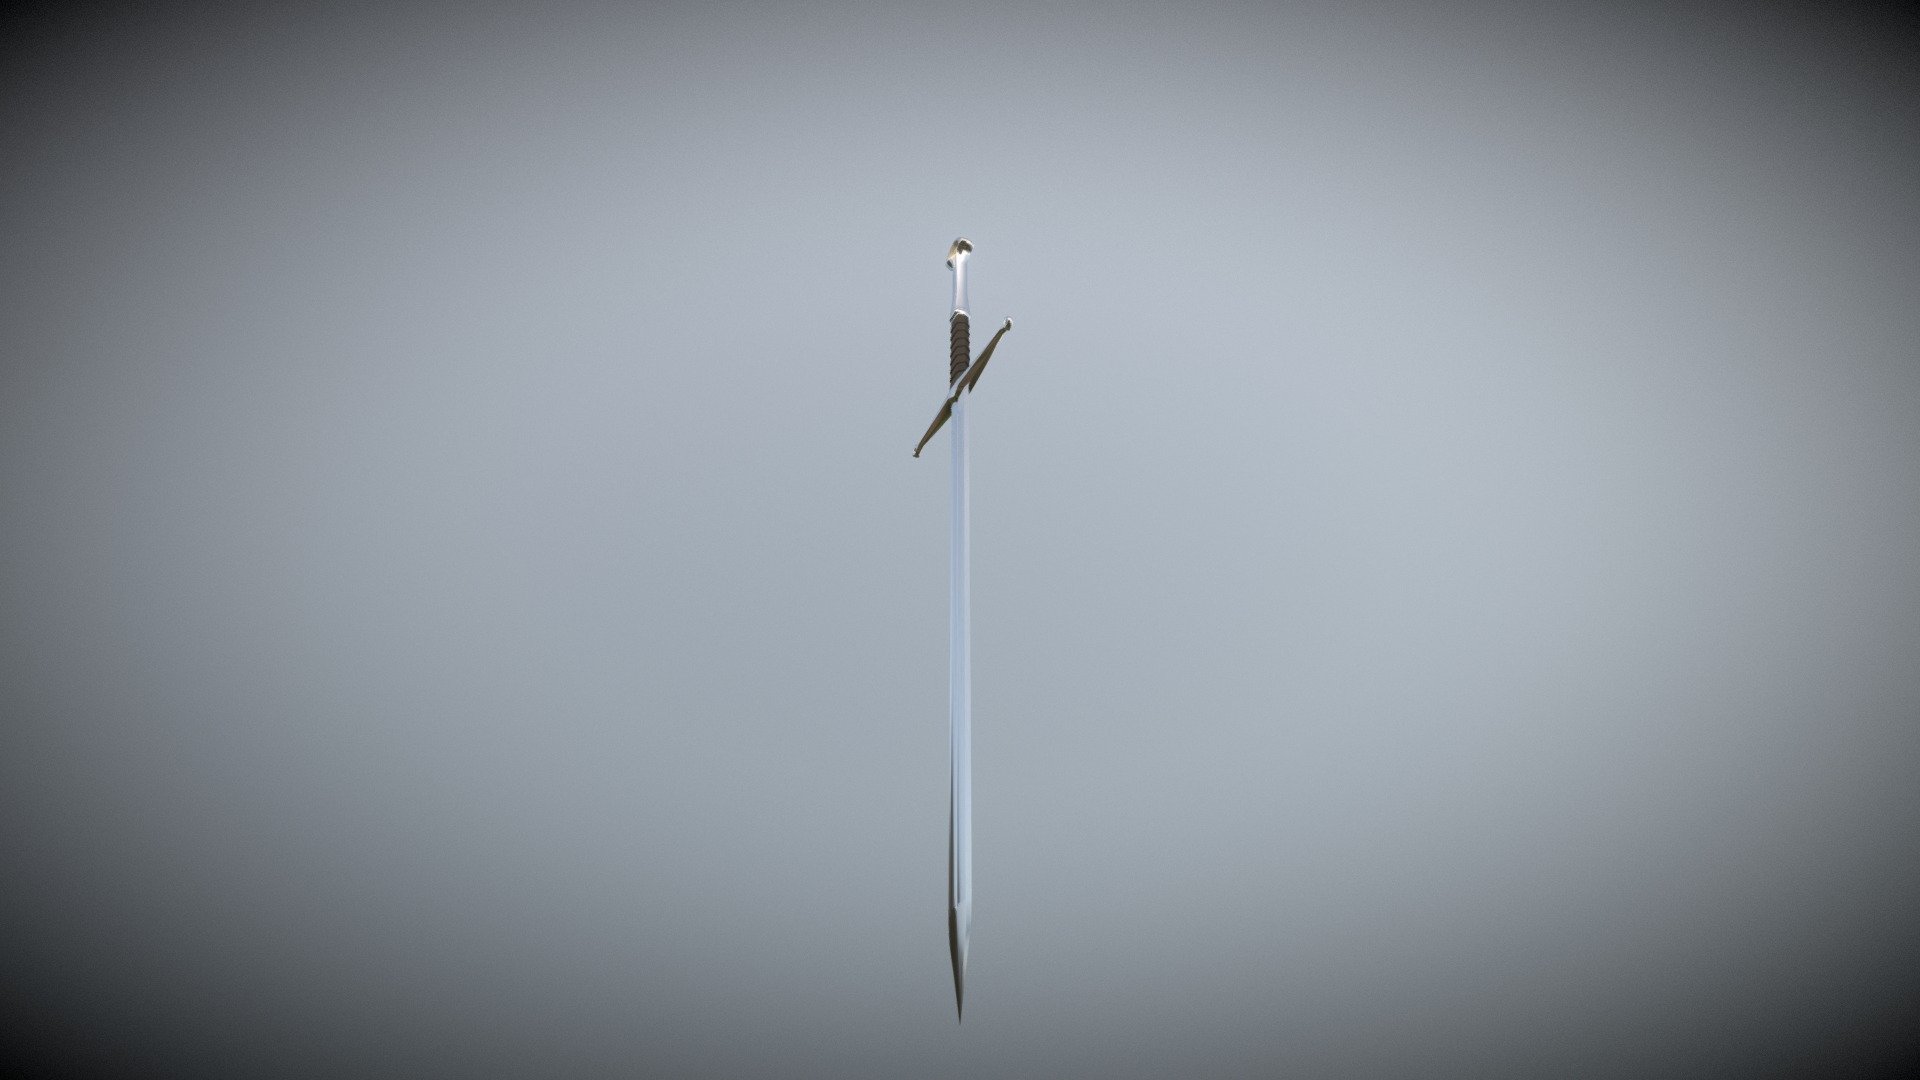 Anduril, The Flame of the West